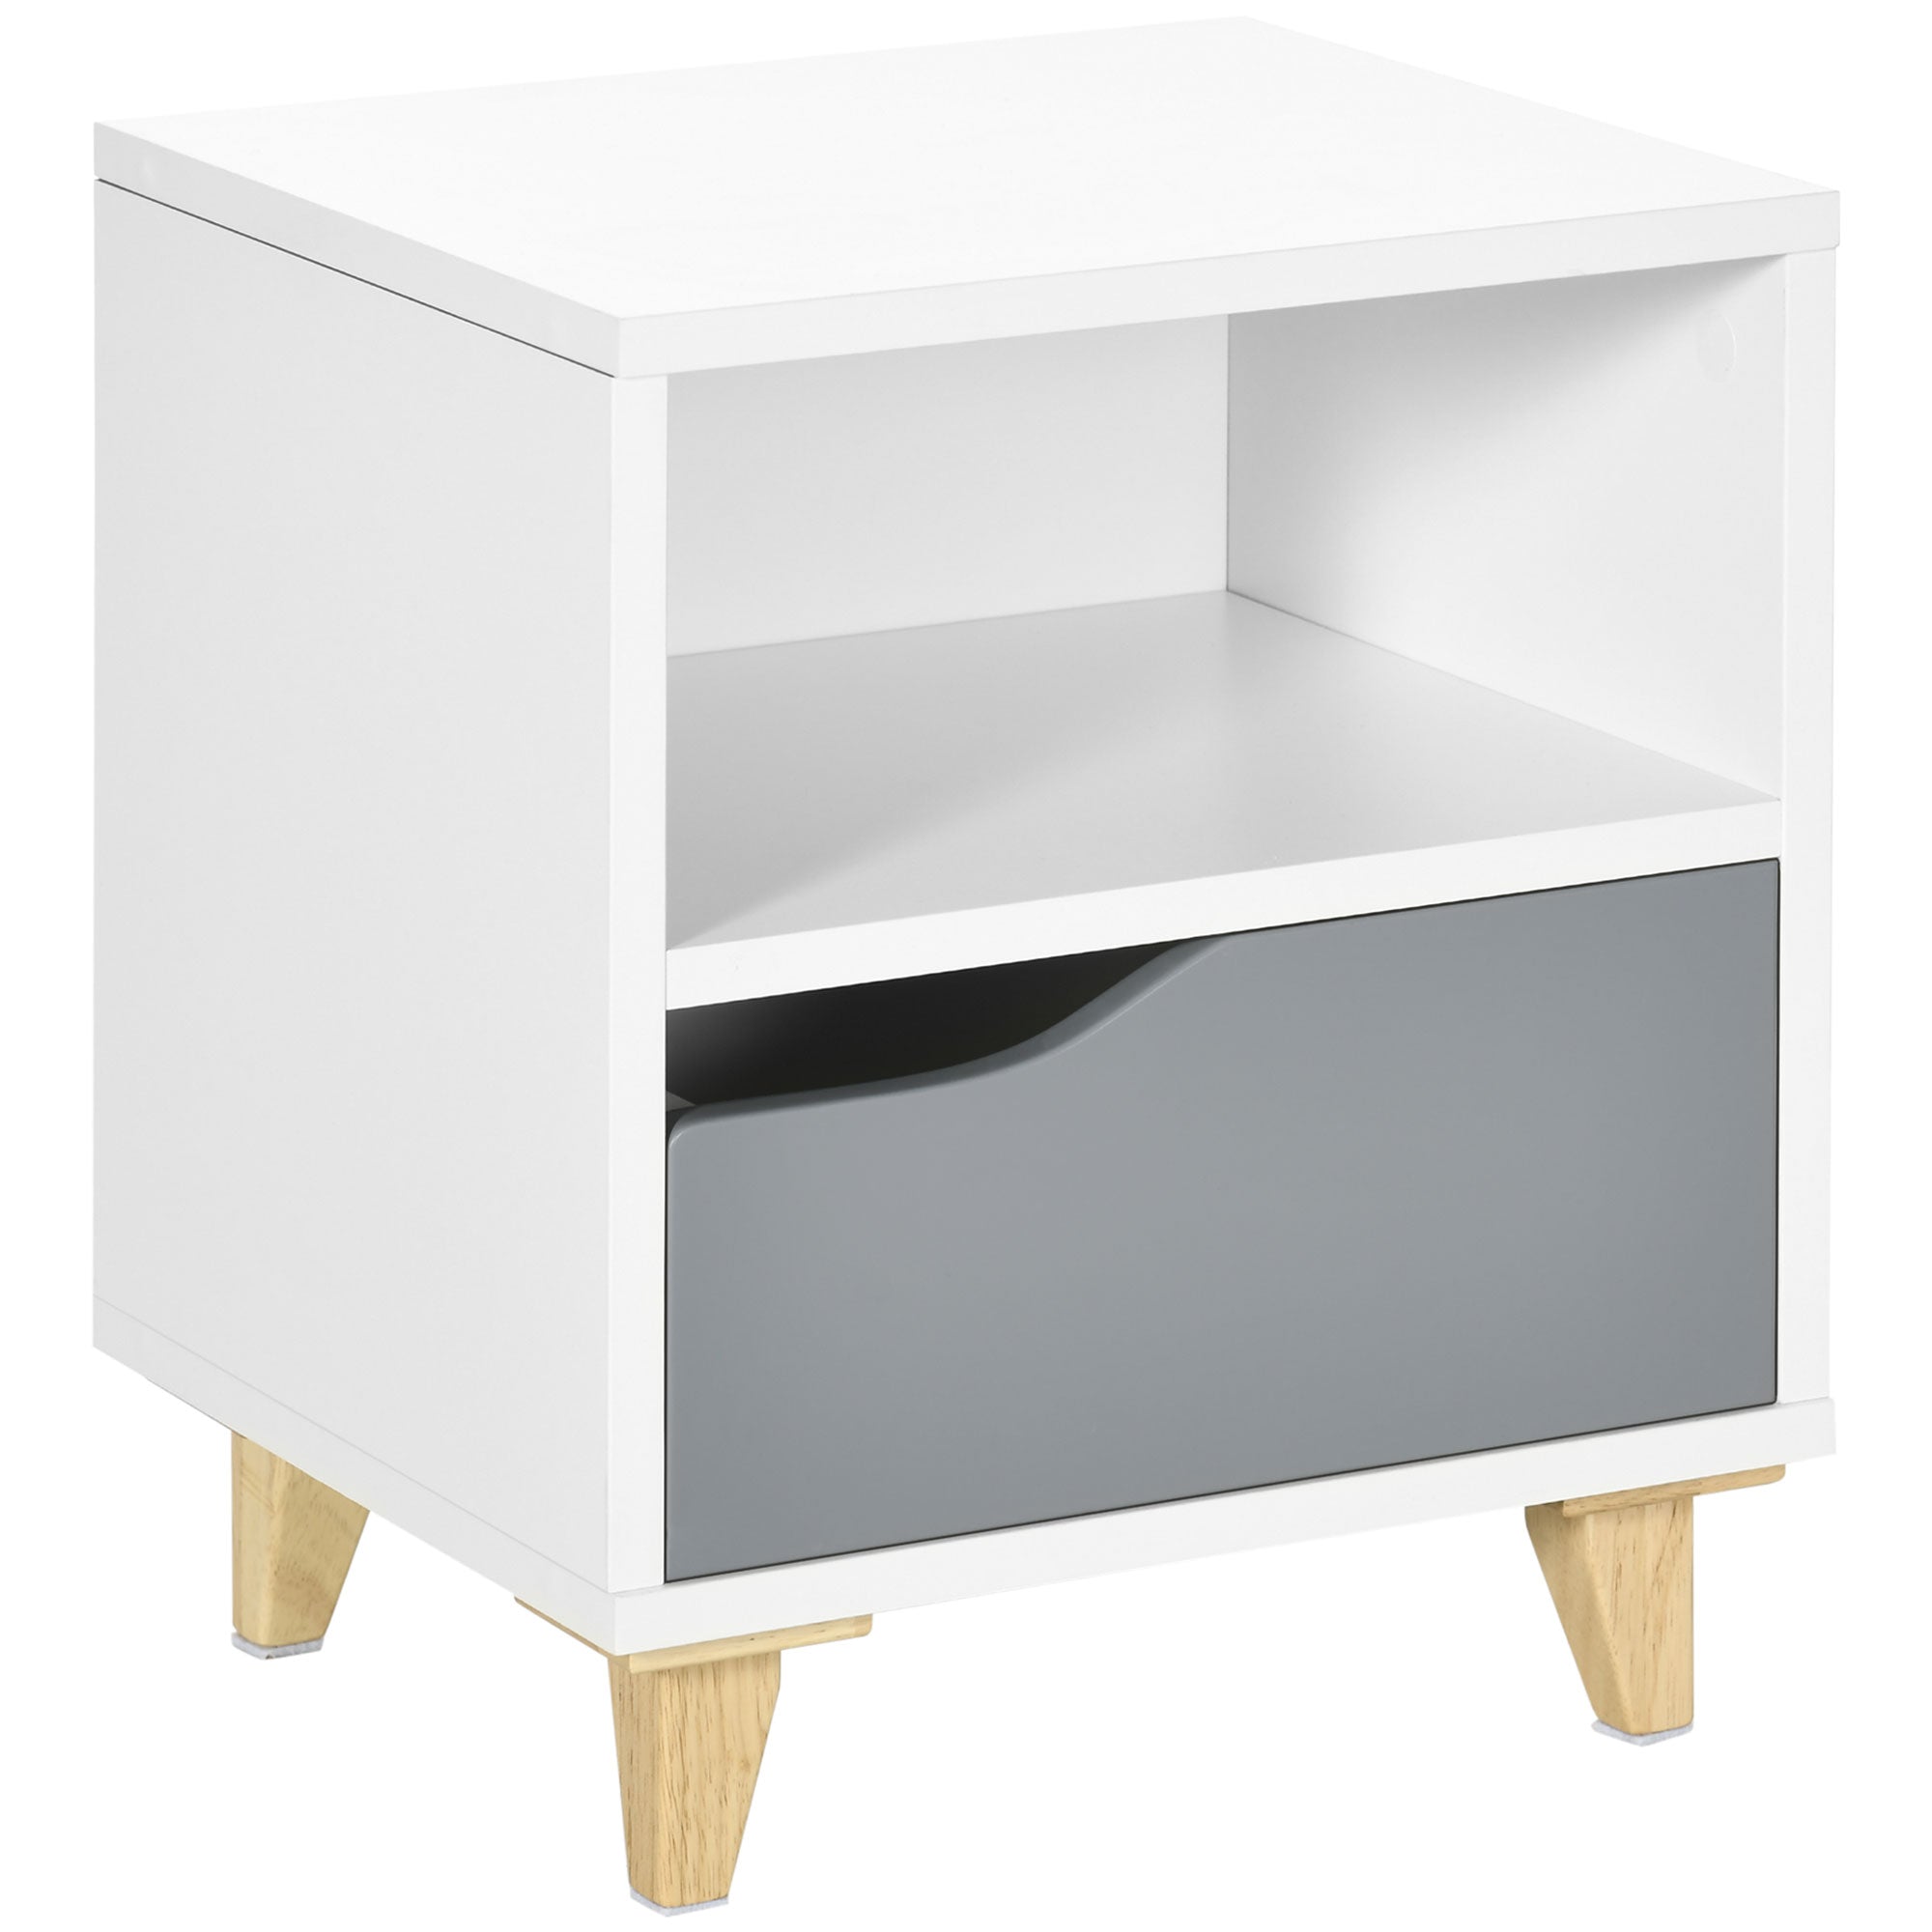 Modern Bedside Table, Side End Table with Shelf, Drawer and Wood Legs, 36.8cmx33cmx43.8cm, White and Grey-0